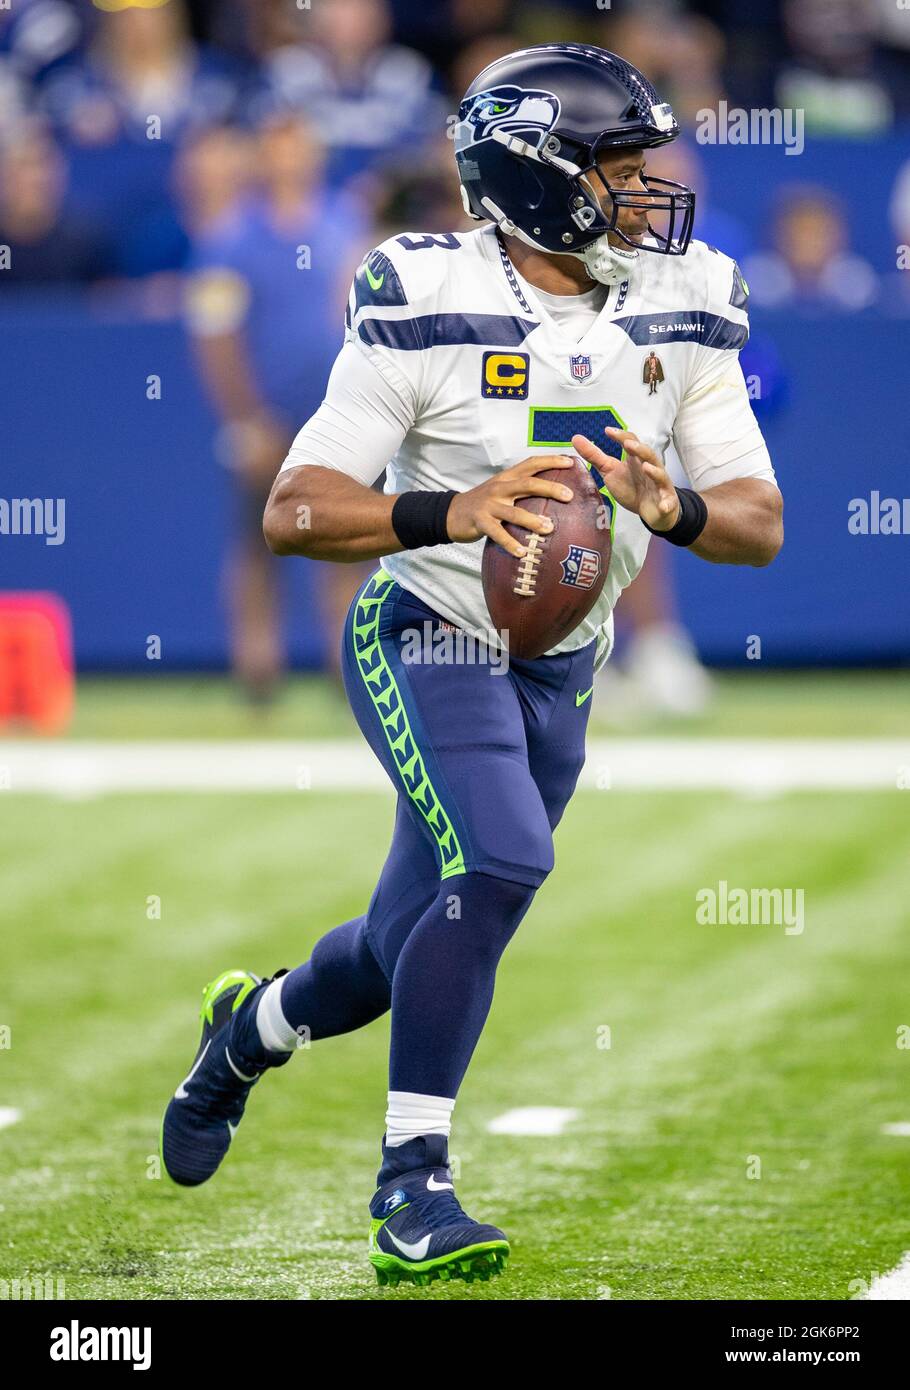 September 12, 2021: Seattle Seahawks quarterback Russell Wilson (3) passes the ball during NFL football game action between the Seattle Seahawks and the Indianapolis Colts at Lucas Oil Stadium in Indianapolis, Indiana. Seattle defeated Indianapolis 28-16. John Mersits/CSM/Sipa USA.(Credit Image: &copy; John Mersits/CSM/Sipa USA) Stock Photo